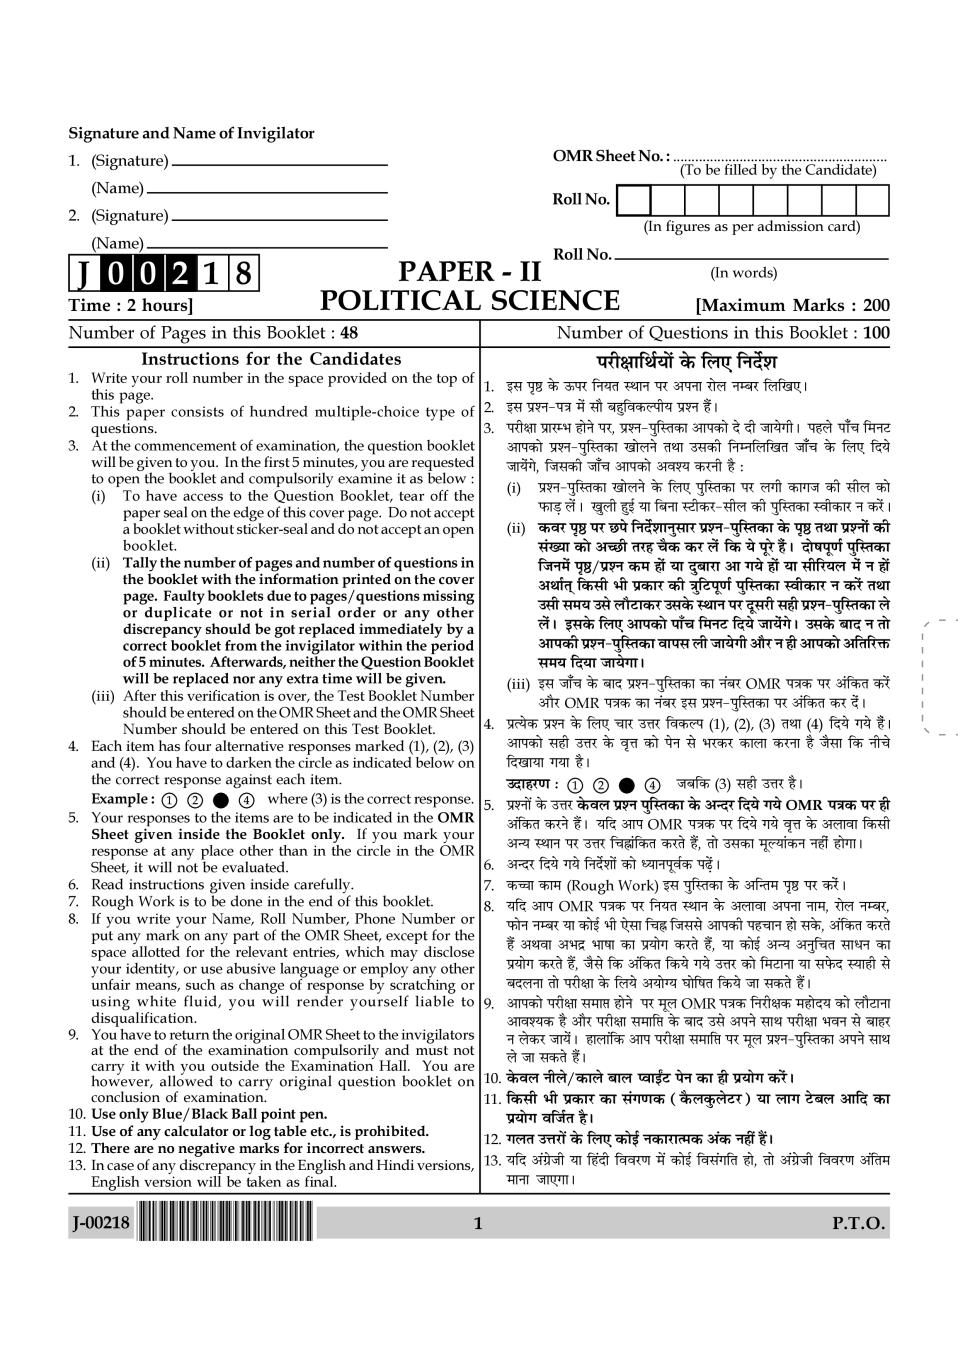 UGC NET Political Science Question Paper 2018 - Page 1